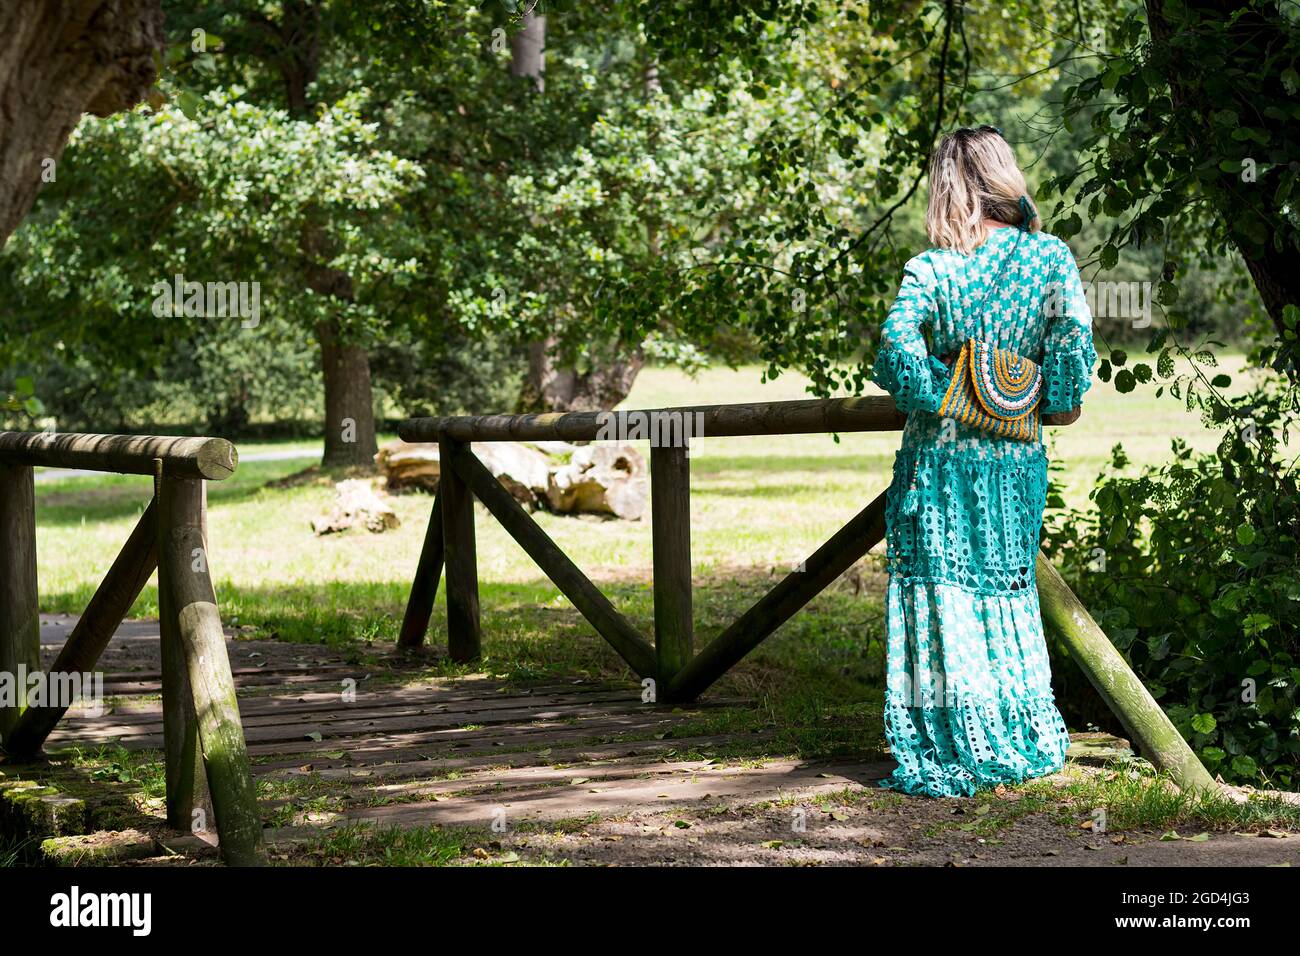 Spanish blonde woman posing with her back on a wooden bridge in a park in Asturias showing her bag and her long green dress.The photograph has a beaut Stock Photo